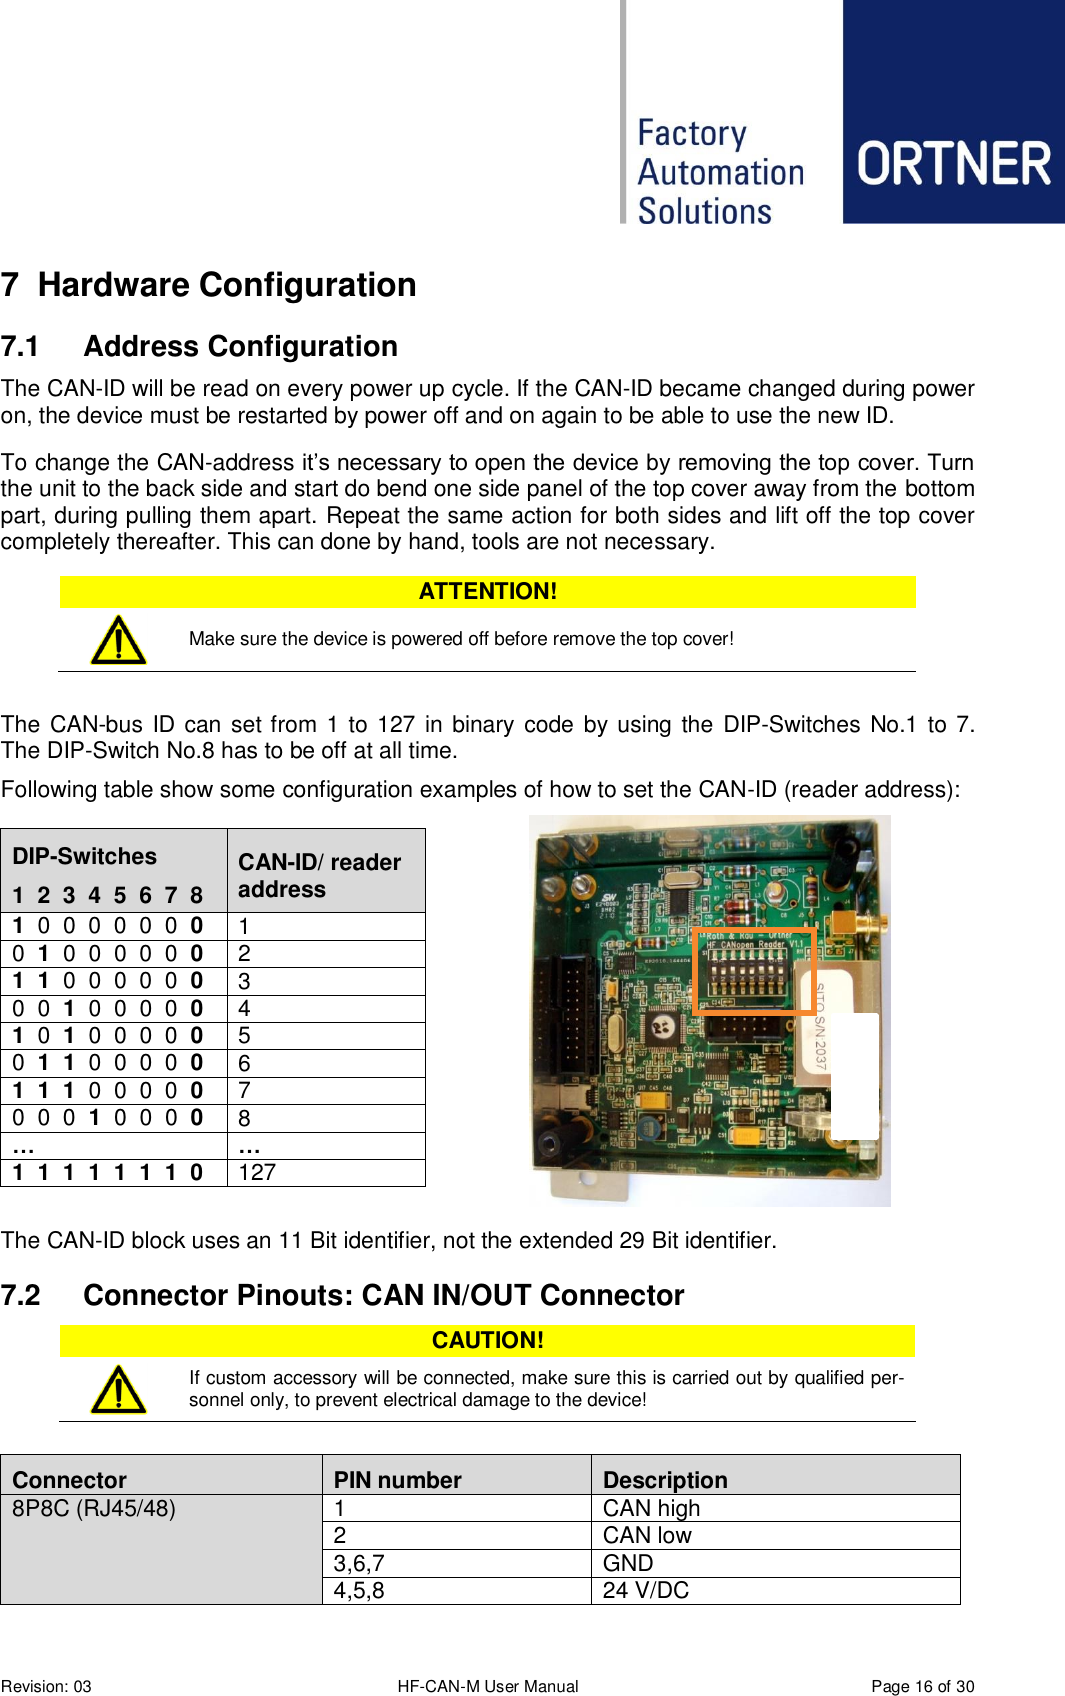  Revision: 03 HF-CAN-M User Manual  Page 16 of 30 7  Hardware Configuration 7.1  Address Configuration The CAN-ID will be read on every power up cycle. If the CAN-ID became changed during power on, the device must be restarted by power off and on again to be able to use the new ID. To change the CAN-address it’s necessary to open the device by removing the top cover. Turn the unit to the back side and start do bend one side panel of the top cover away from the bottom part, during pulling them apart. Repeat the same action for both sides and lift off the top cover completely thereafter. This can done by hand, tools are not necessary. ATTENTION!  Make sure the device is powered off before remove the top cover!  The CAN-bus  ID can set from 1 to 127 in binary code by using the DIP-Switches No.1 to 7. The DIP-Switch No.8 has to be off at all time.  Following table show some configuration examples of how to set the CAN-ID (reader address):  The CAN-ID block uses an 11 Bit identifier, not the extended 29 Bit identifier. 7.2  Connector Pinouts: CAN IN/OUT Connector CAUTION!  If custom accessory will be connected, make sure this is carried out by qualified per-sonnel only, to prevent electrical damage to the device!  Connector PIN number Description 8P8C (RJ45/48) 1 CAN high 2 CAN low 3,6,7 GND 4,5,8 24 V/DC DIP-Switches 1  2  3  4  5  6  7  8 CAN-ID/ reader address 1  0  0  0  0  0  0  0 1 0  1  0  0  0  0  0  0 2 1  1  0  0  0  0  0  0 3 0  0  1  0  0  0  0  0 4 1  0  1  0  0  0  0  0 5 0  1  1  0  0  0  0  0 6 1  1  1  0  0  0  0  0 7 0  0  0  1  0  0  0  0 8 … … 1  1  1  1  1  1  1  0 127 